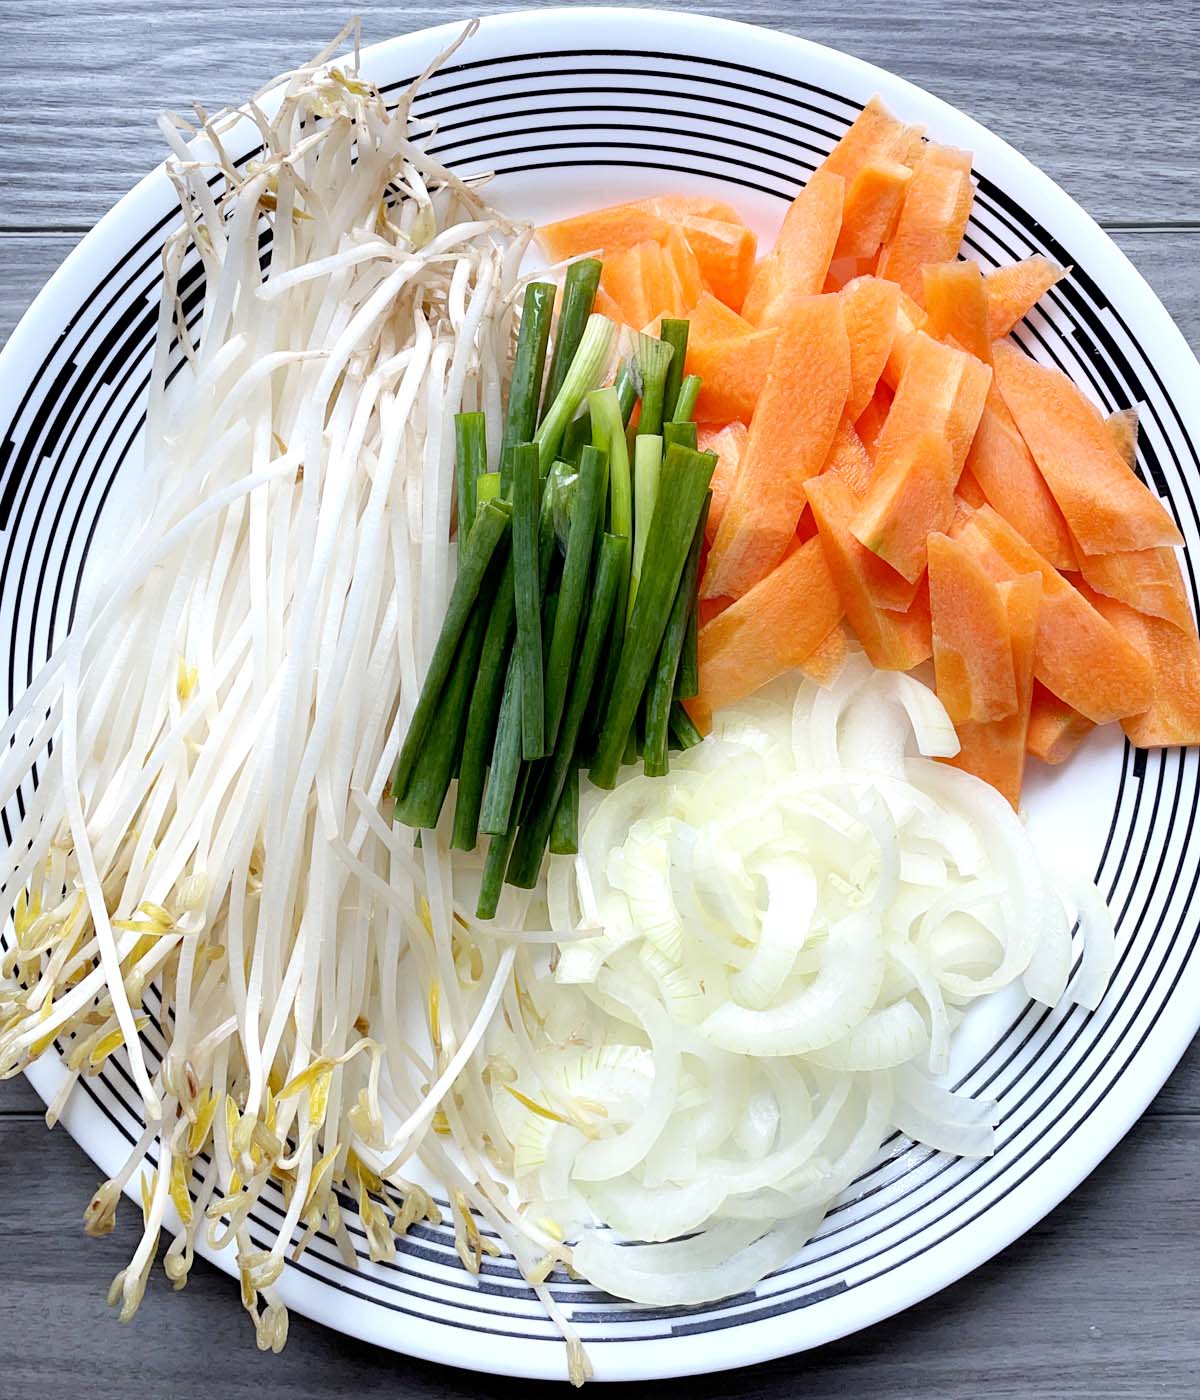 A round white plate containing bean sprouts, green onions, sliced white onions, and carrots.